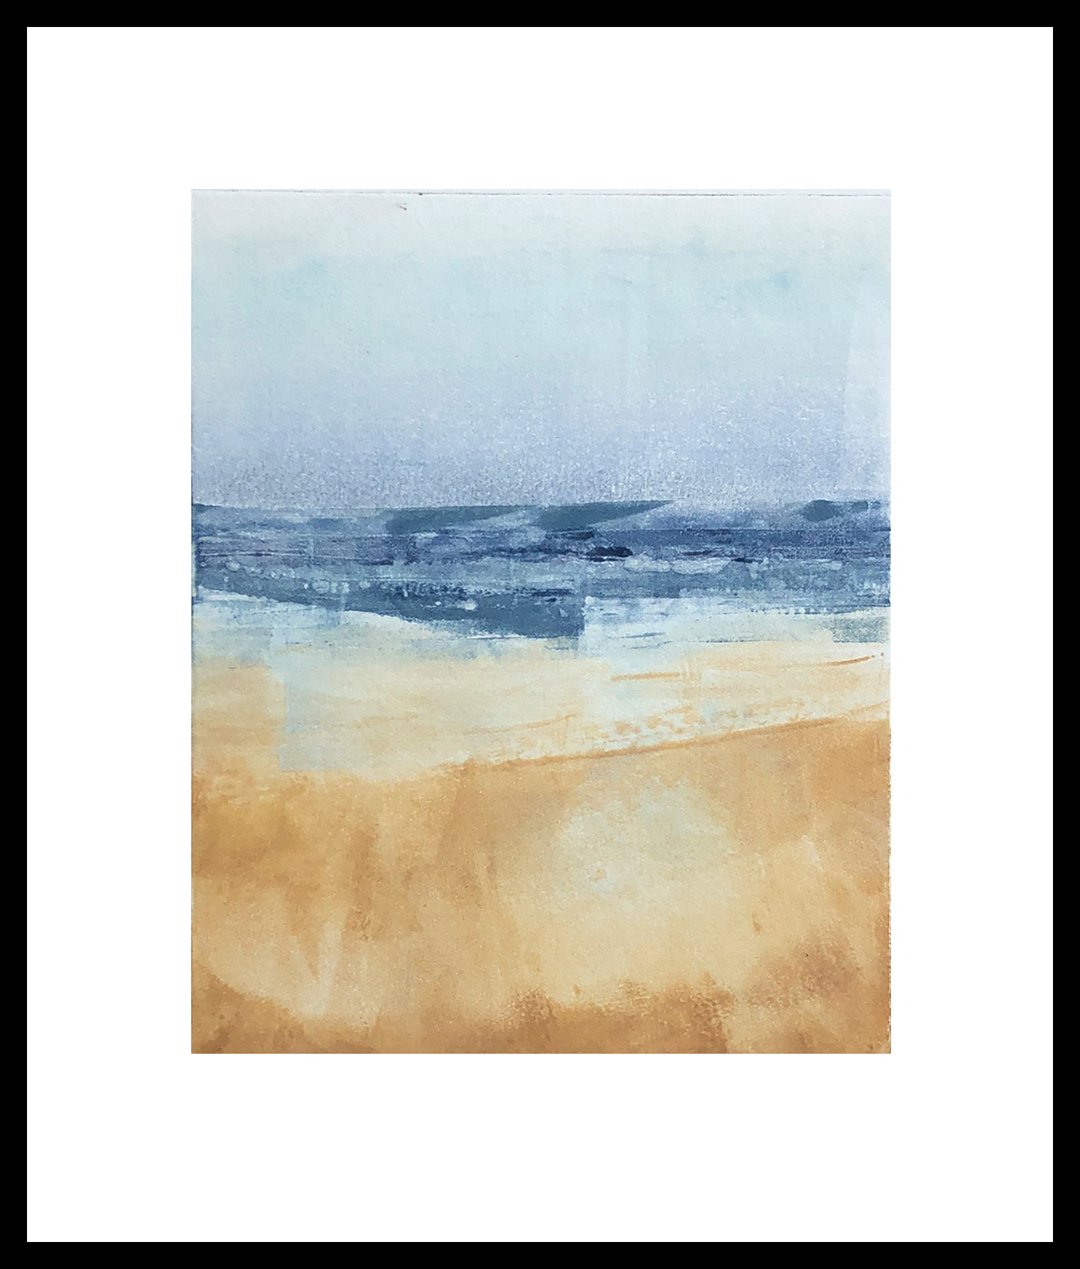    Fog is Lifting   Walks on the beach while the fog lifts. What a view! Monotype, Mat/ frame @15 x 13.” 1/1   $335 - SOLD  